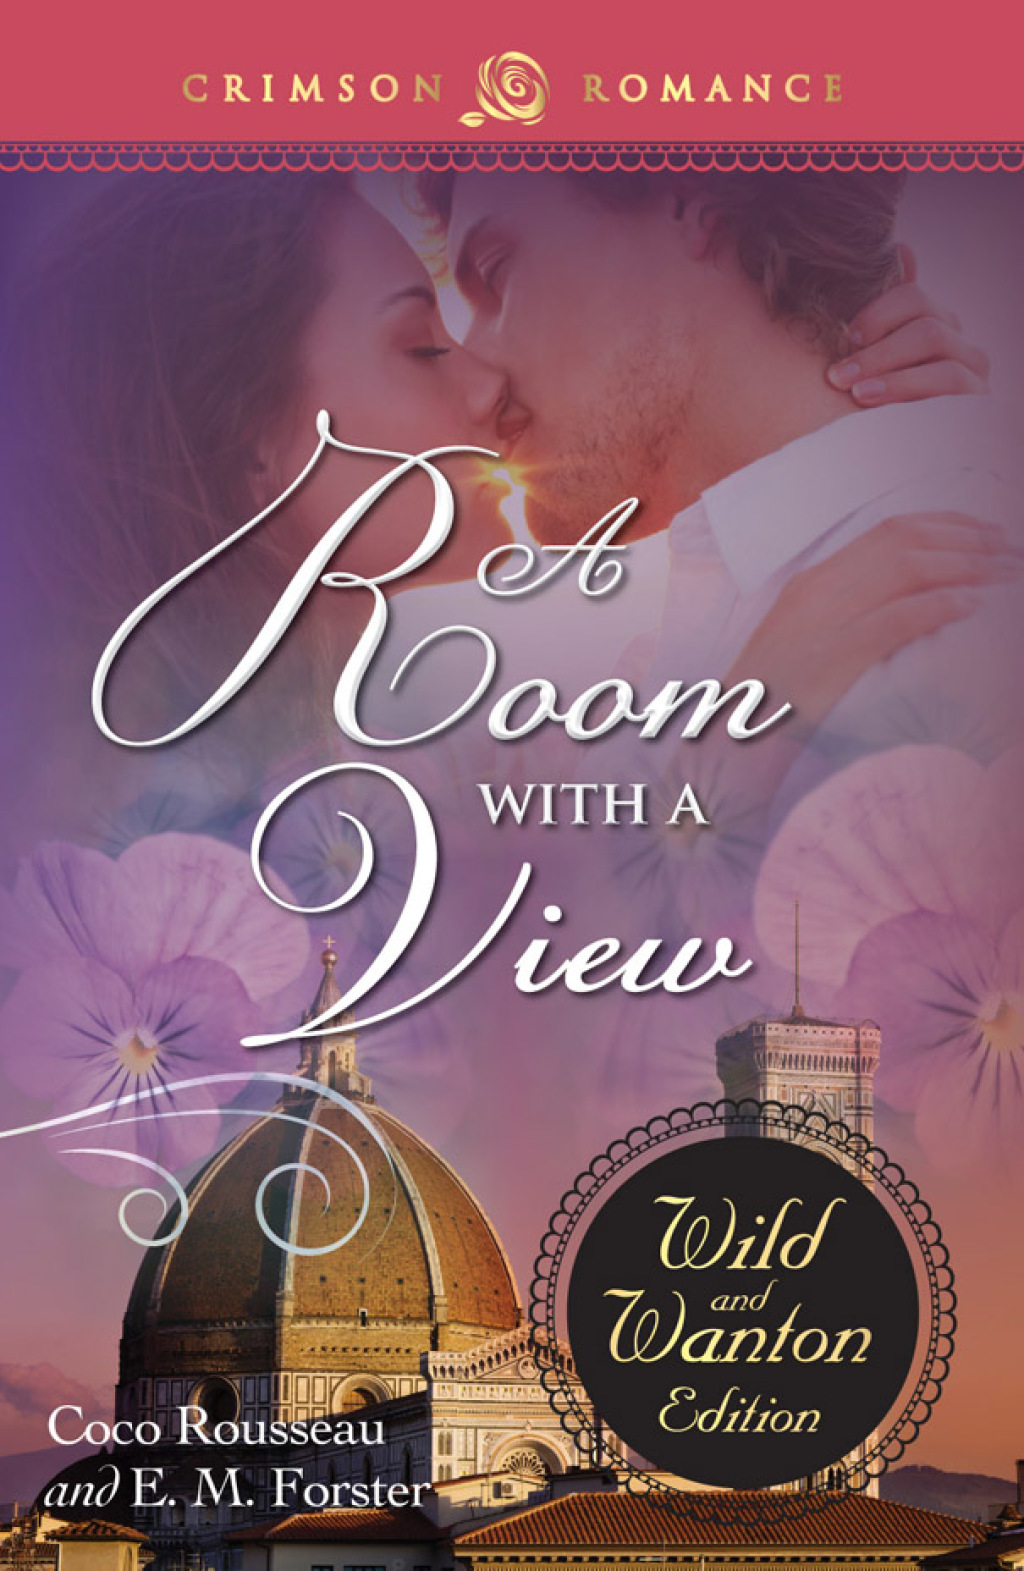 A ROOM WITH A VIEW: THE WILD & WANTON EDITION (eBook) - Coco Rousseau; E.M. Forster